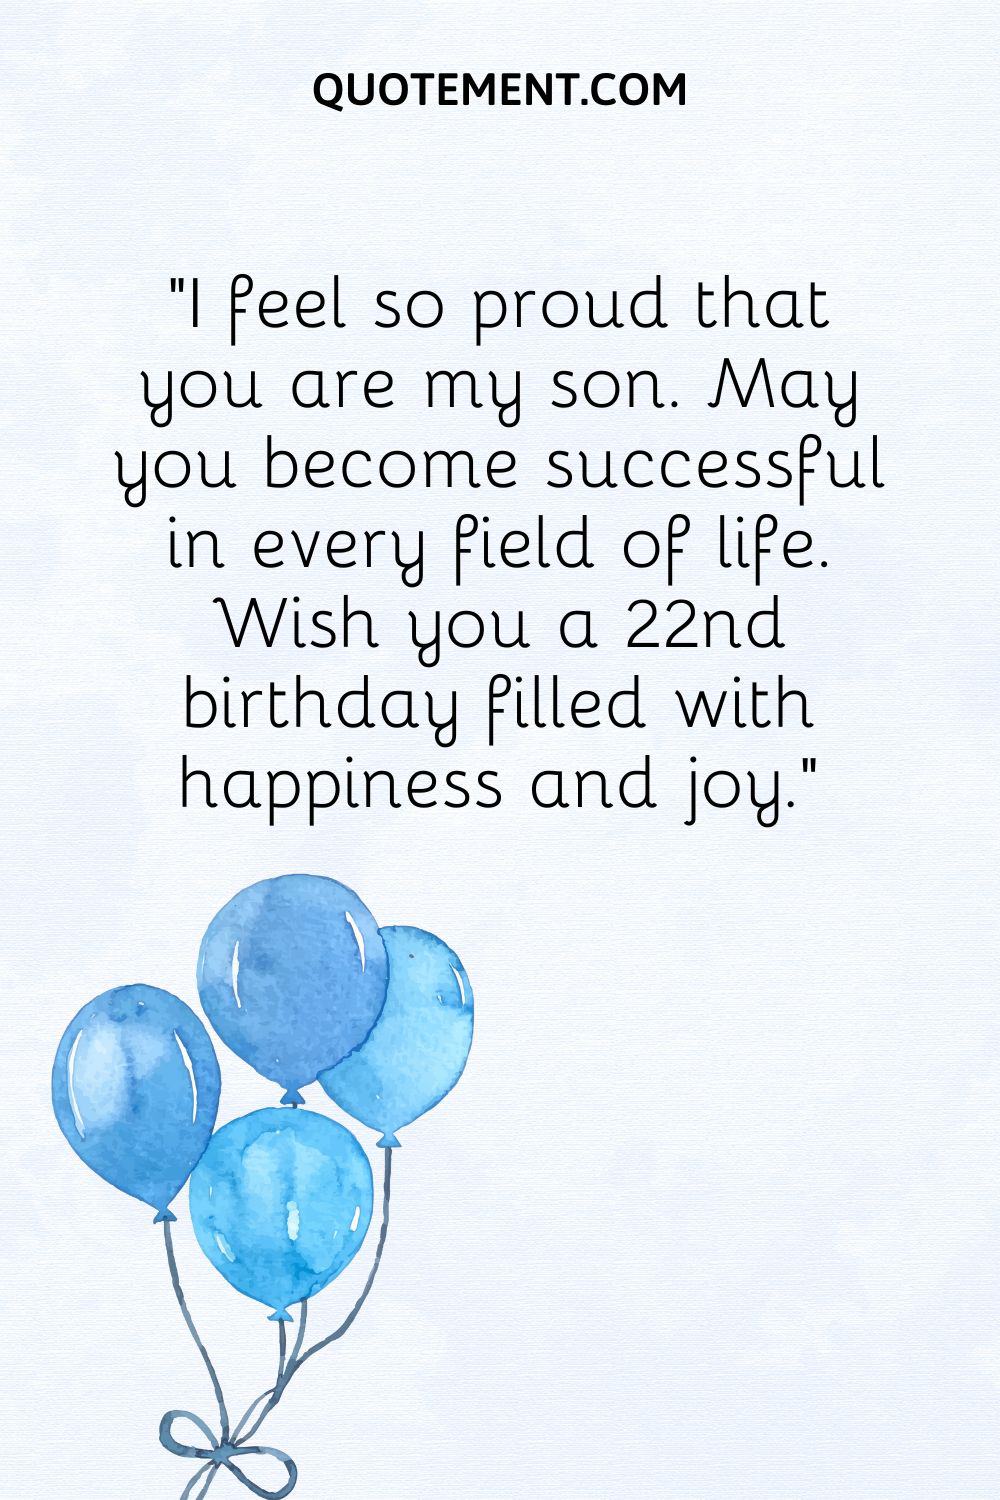 blue balloons image representing happy 22nd birthday son wish